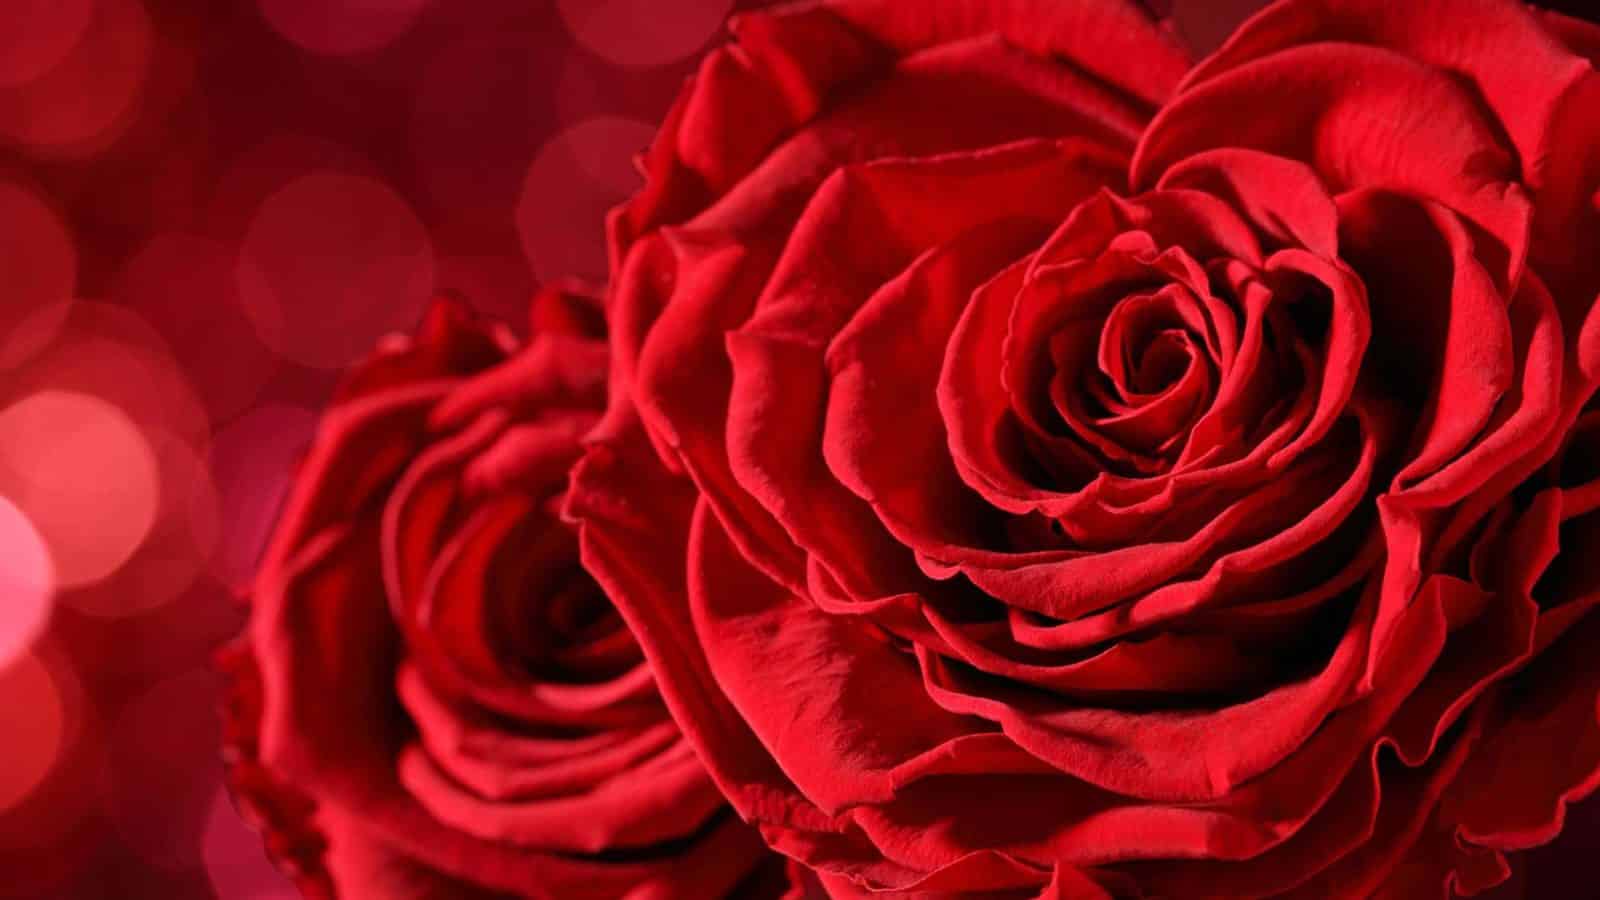 Close-up of red roses against a red blurred background